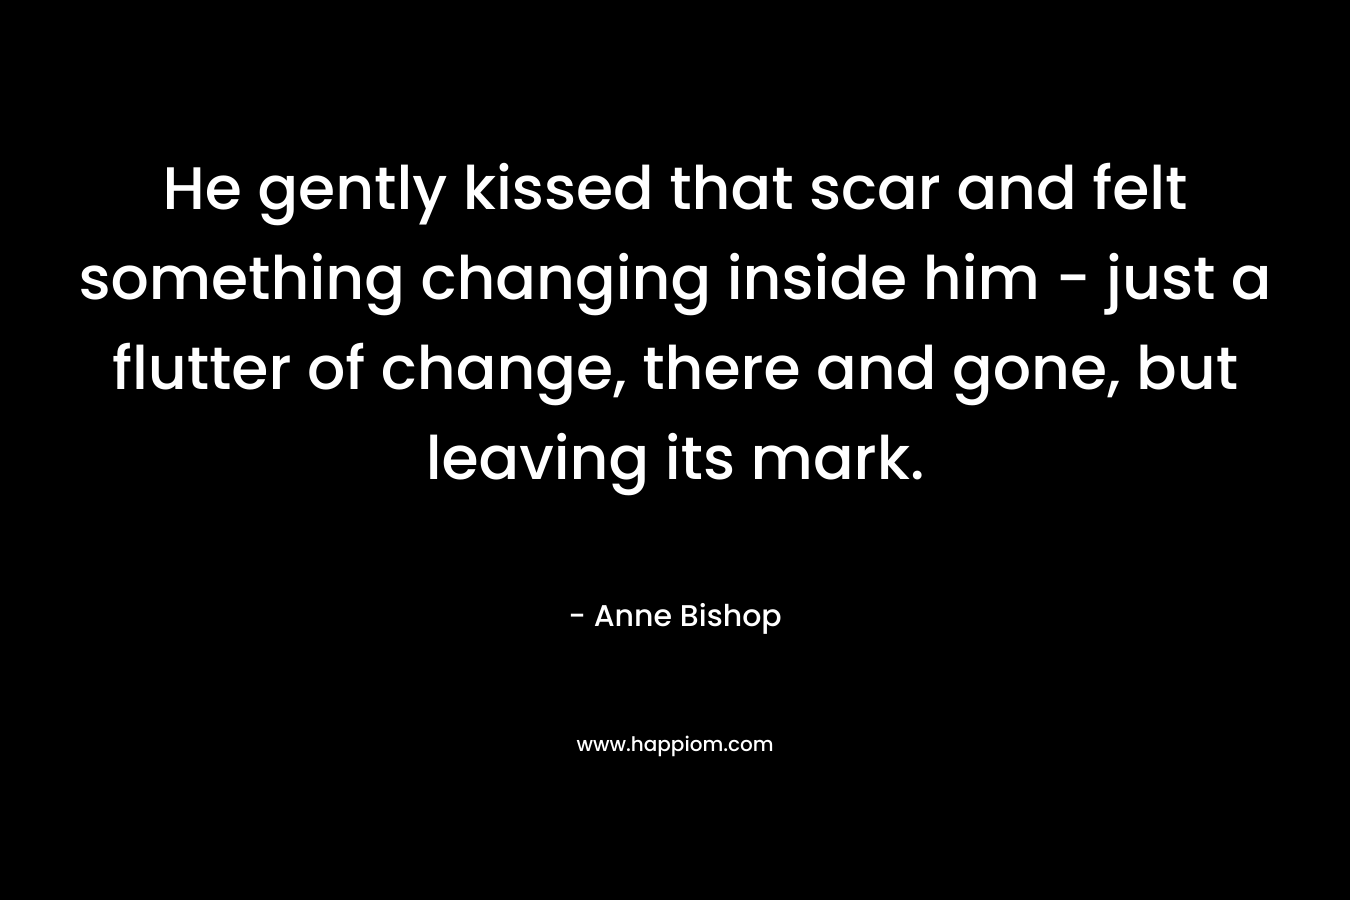 He gently kissed that scar and felt something changing inside him - just a flutter of change, there and gone, but leaving its mark.